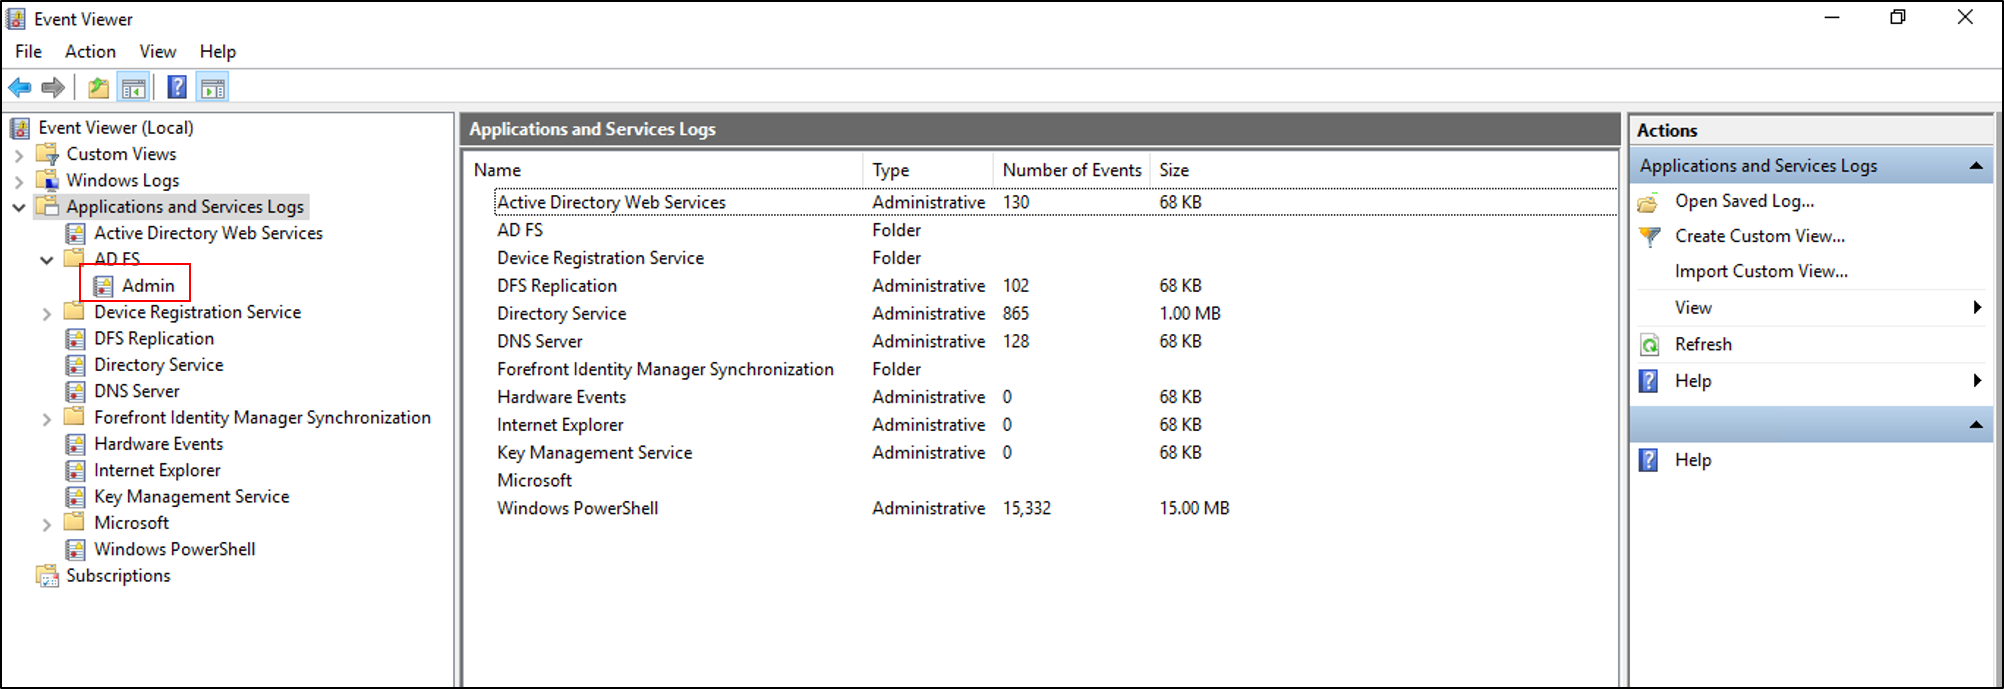 Screenshot of the Event Viewer with the Admin option called out.